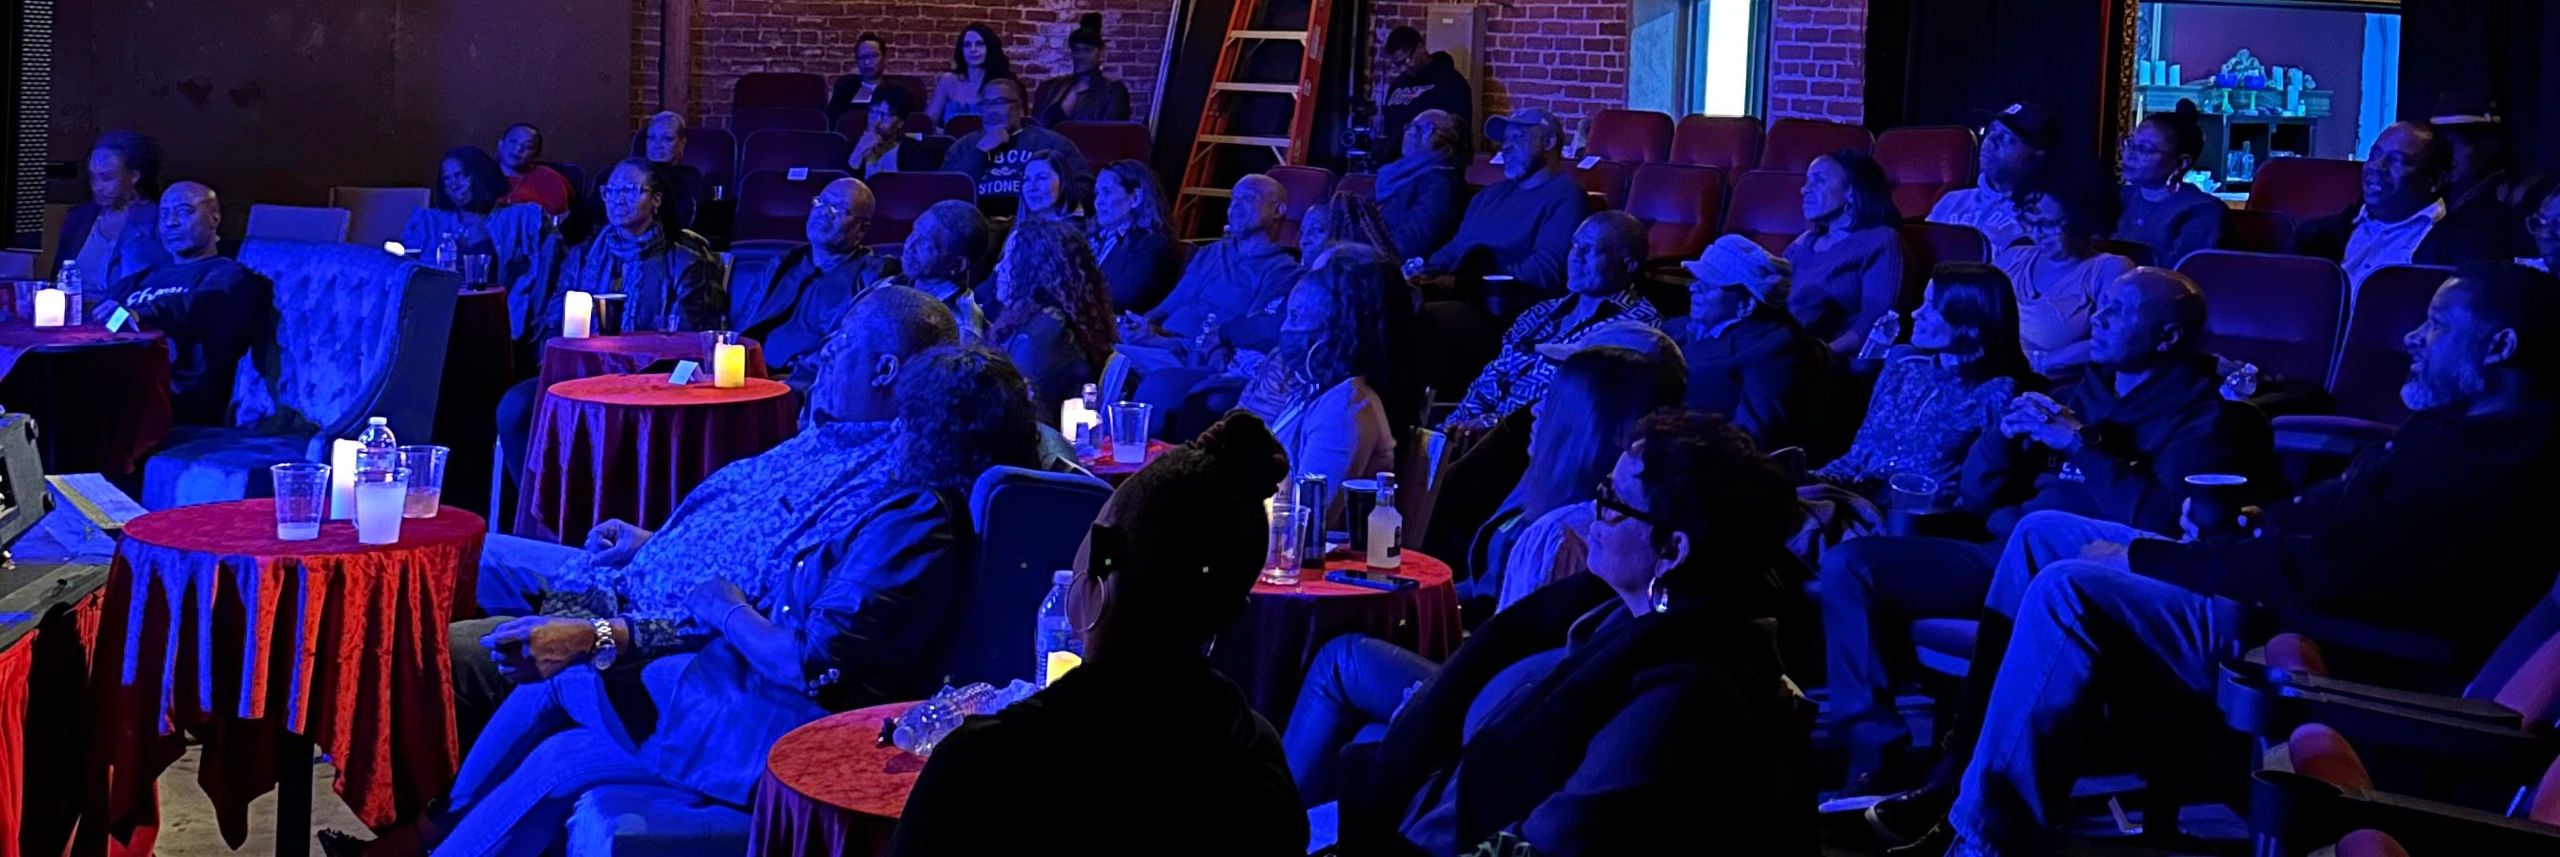 Great crowd at Blvd Nights Comedy Series